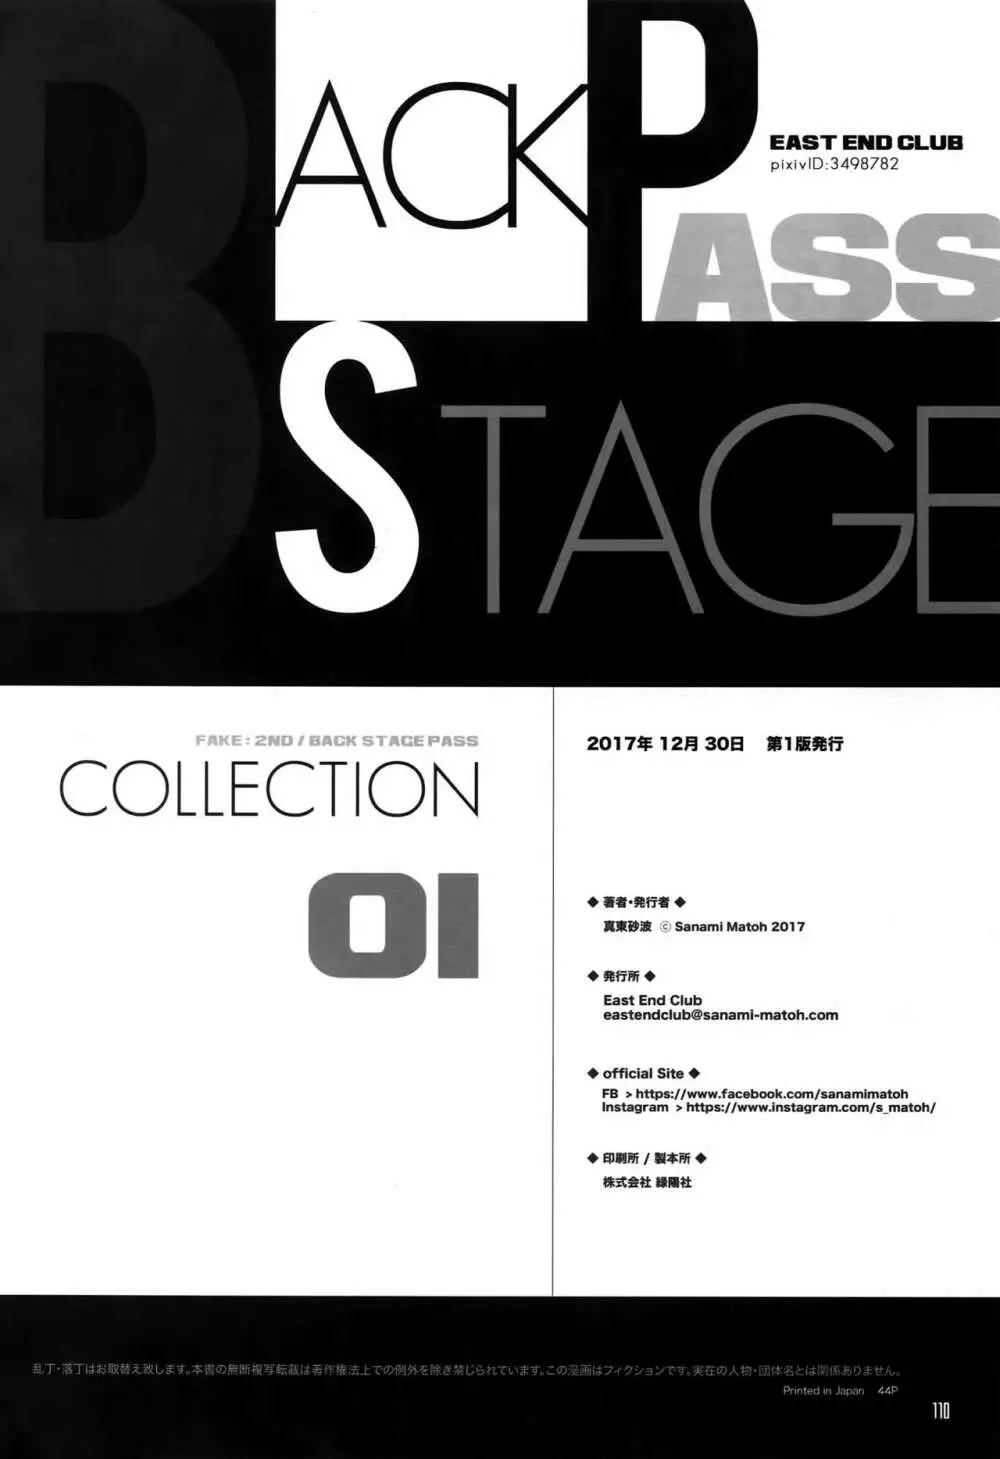 FAKE:2ND/BACK STAGE PASS COLLECTION 01 Page.108